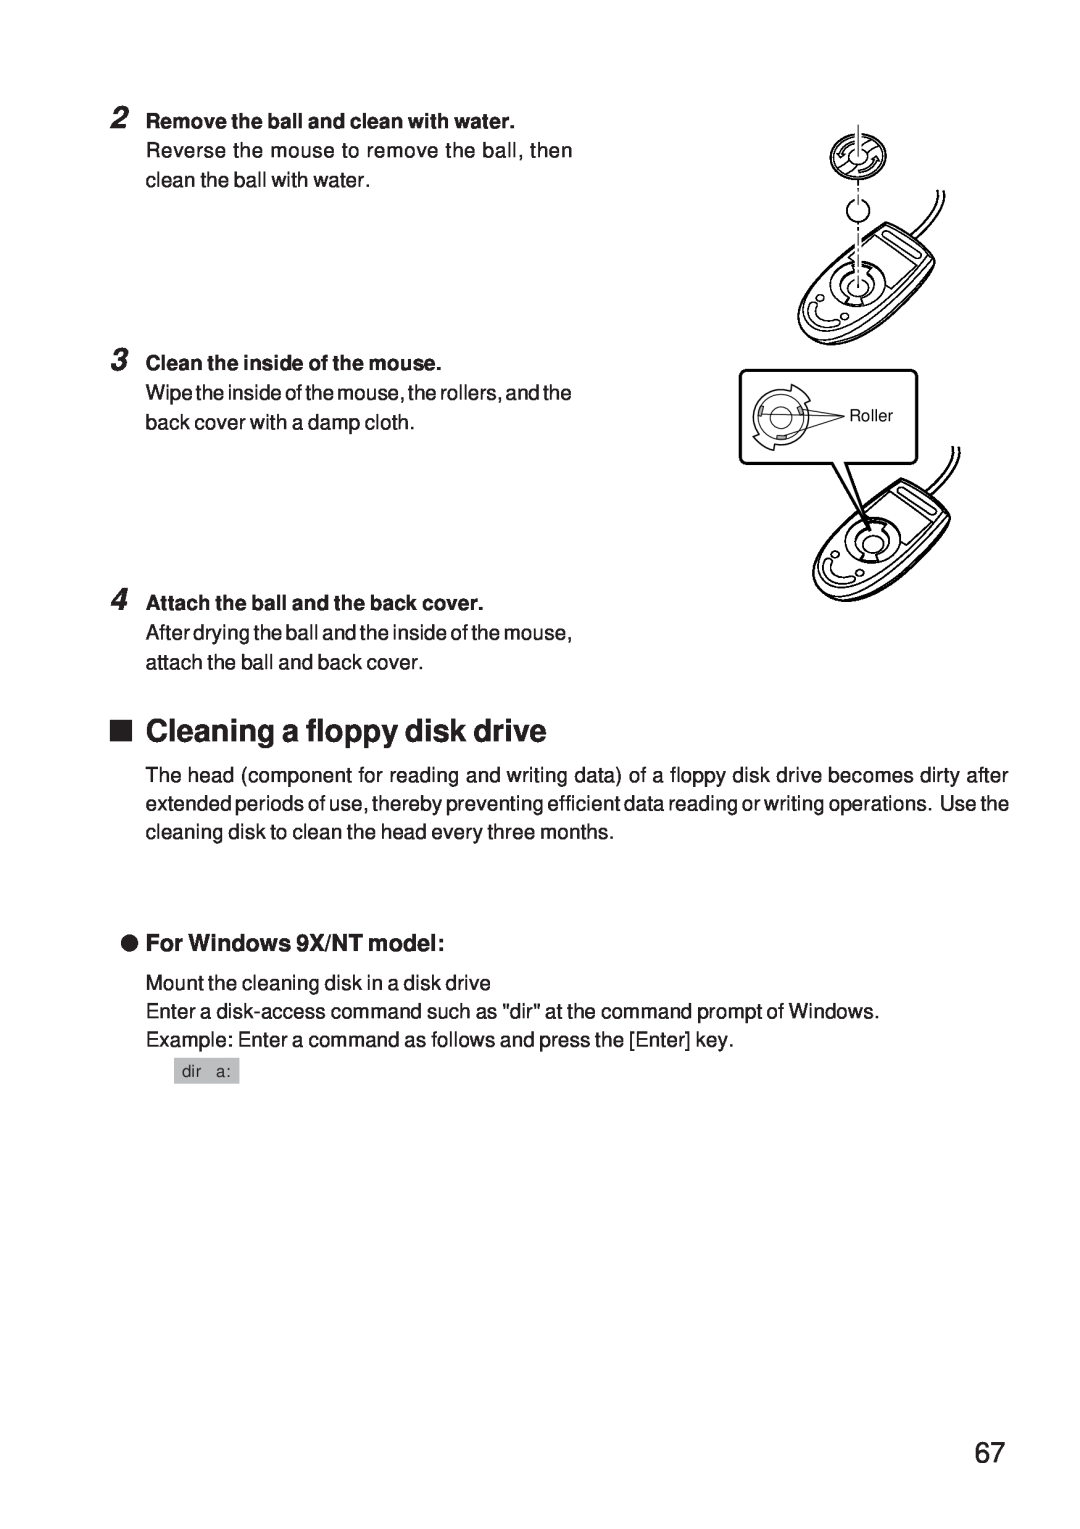 Fujitsu 5000 user manual Cleaning a floppy disk drive, For Windows 9X/NT model, Remove the ball and clean with water 